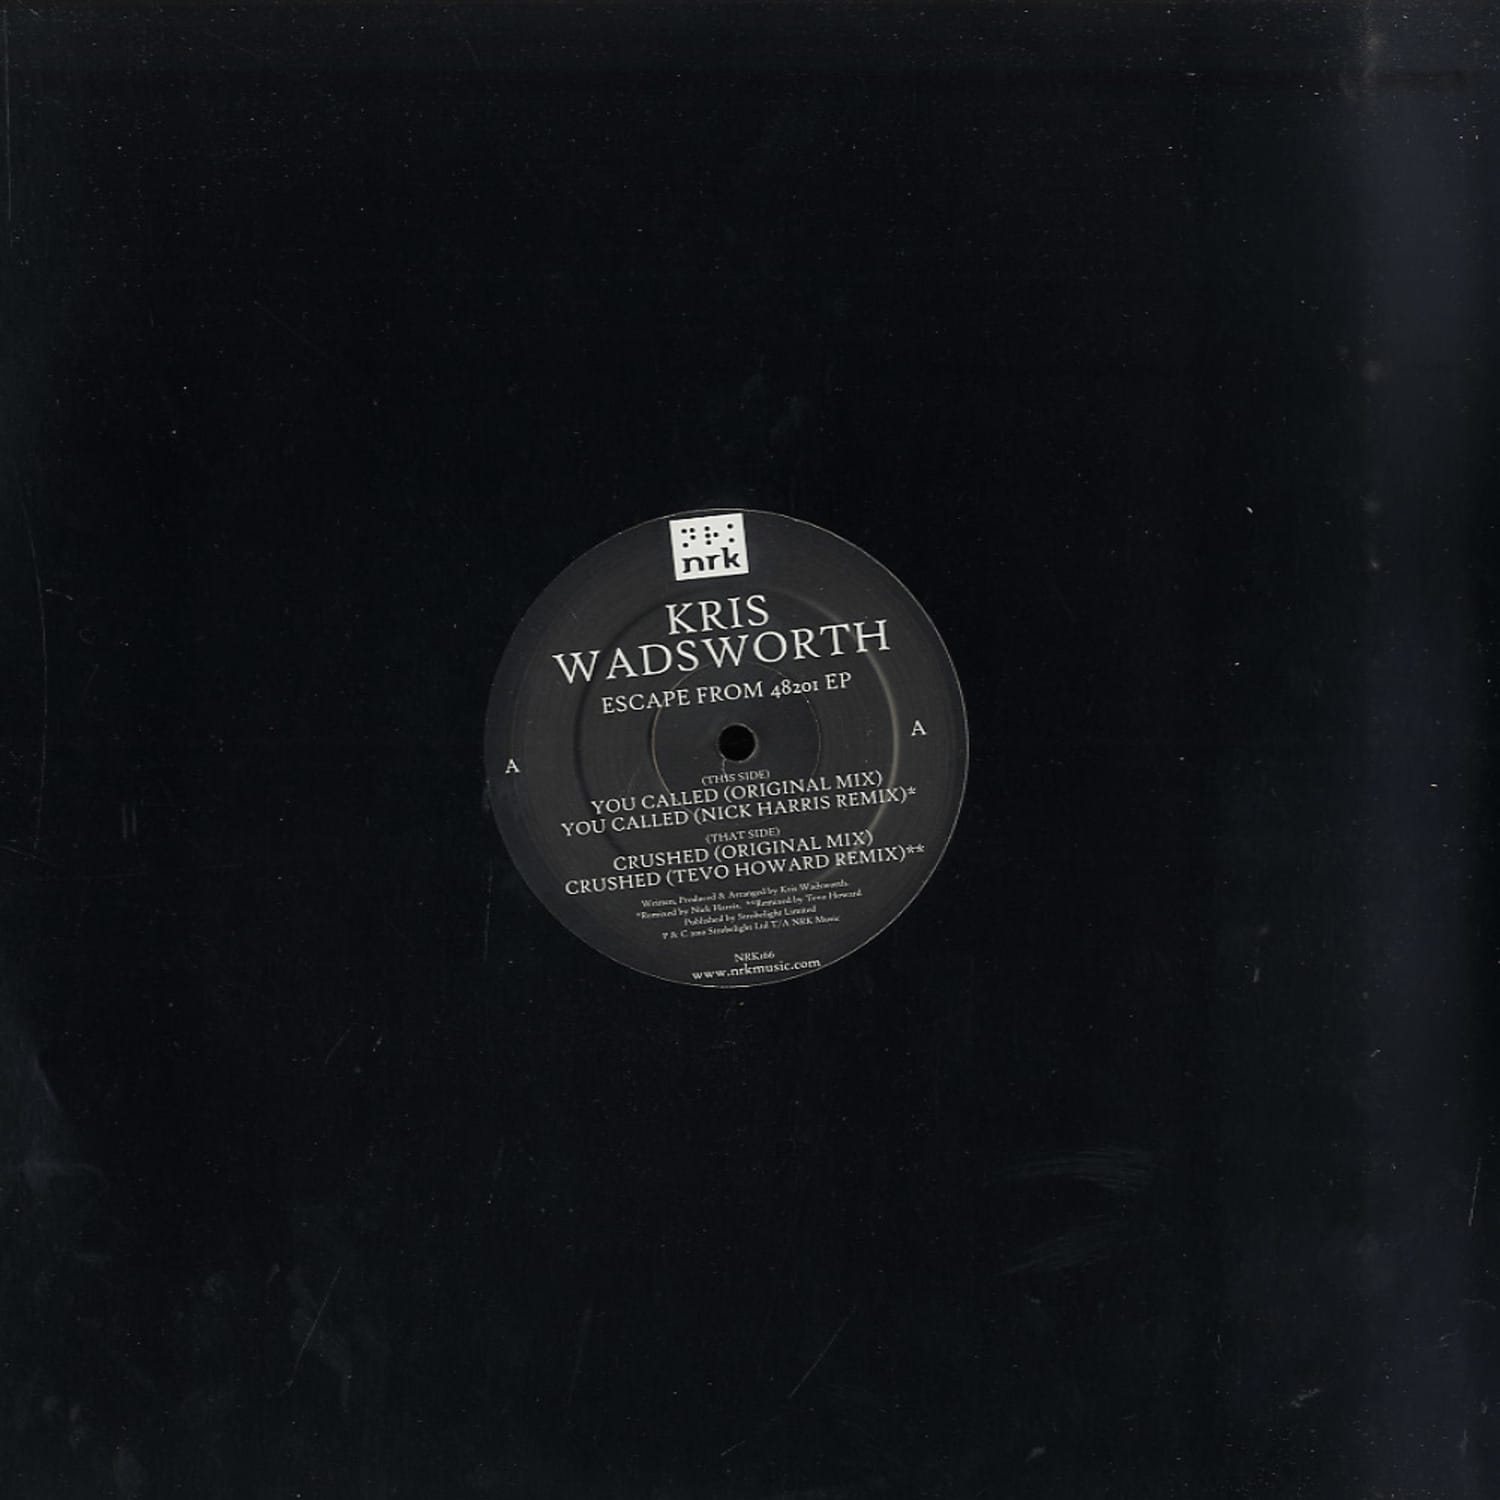 Kris Wadsworth - ESCAPE FROM 48201 EP